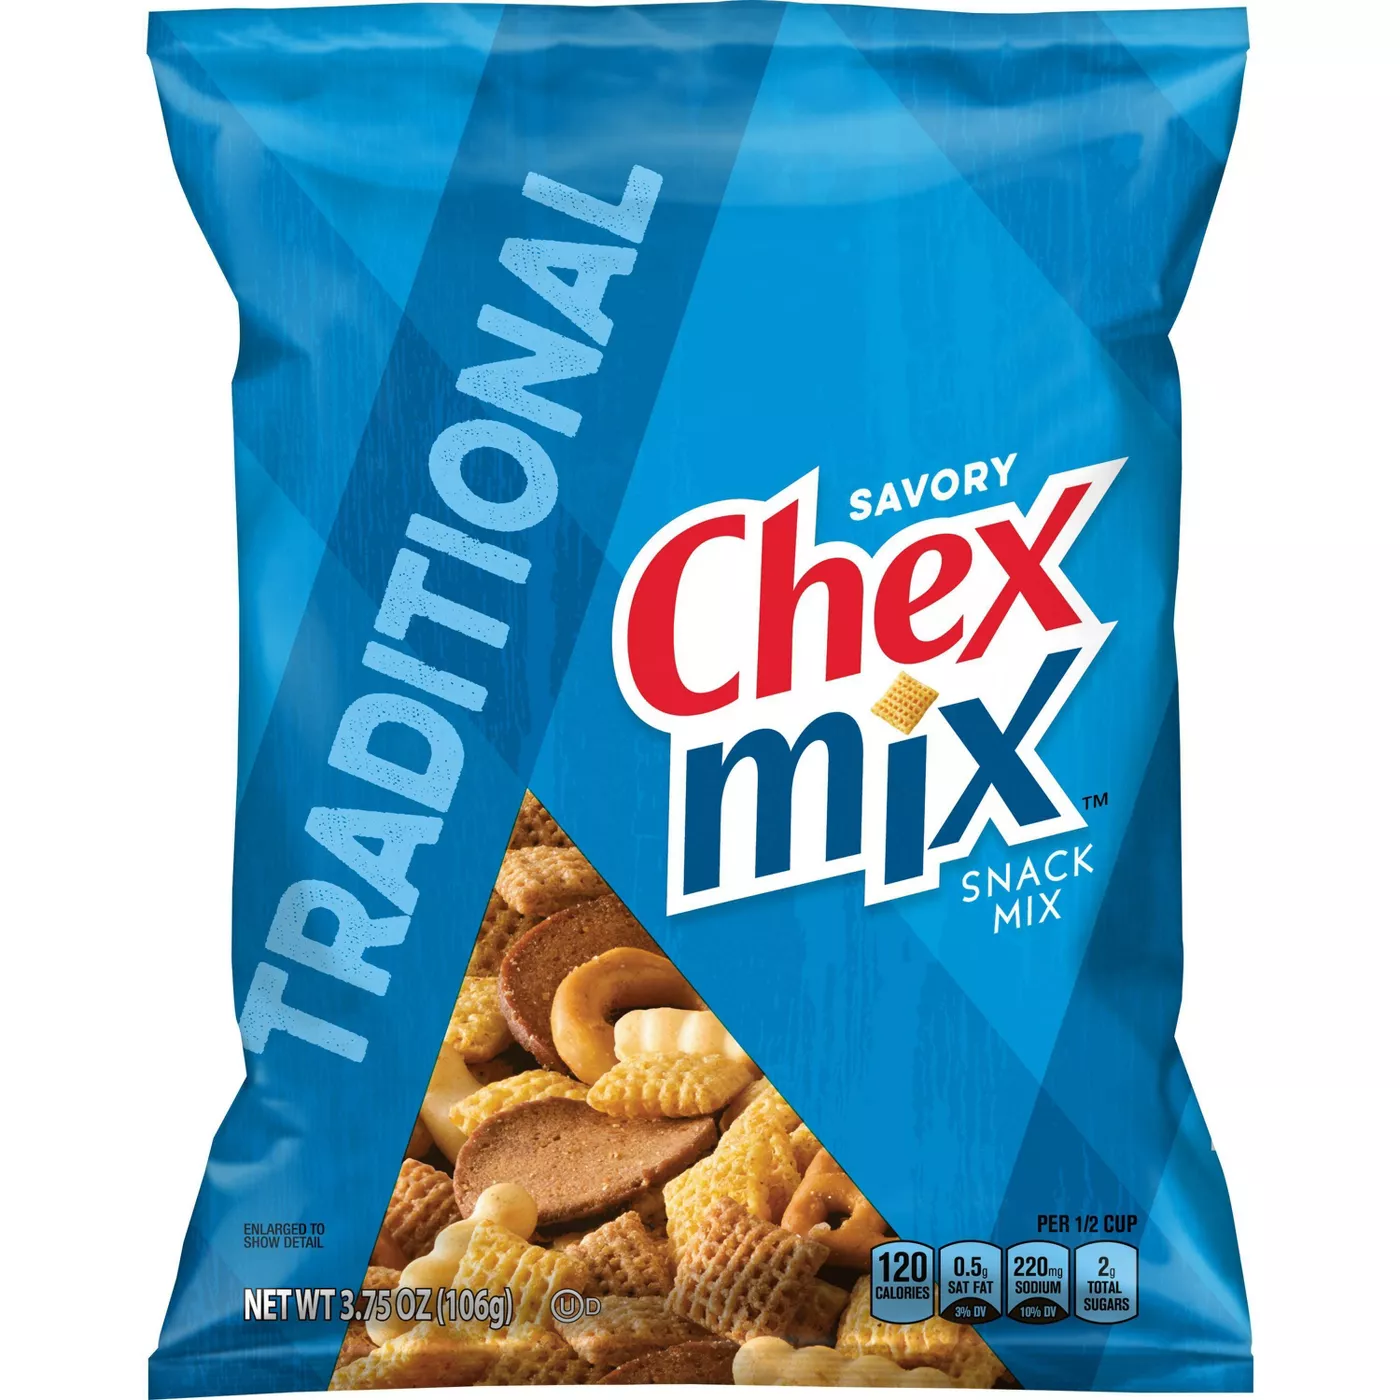 Chex Mix Savory Traditional Snack Mix - 3.75oz - image 1 of 4